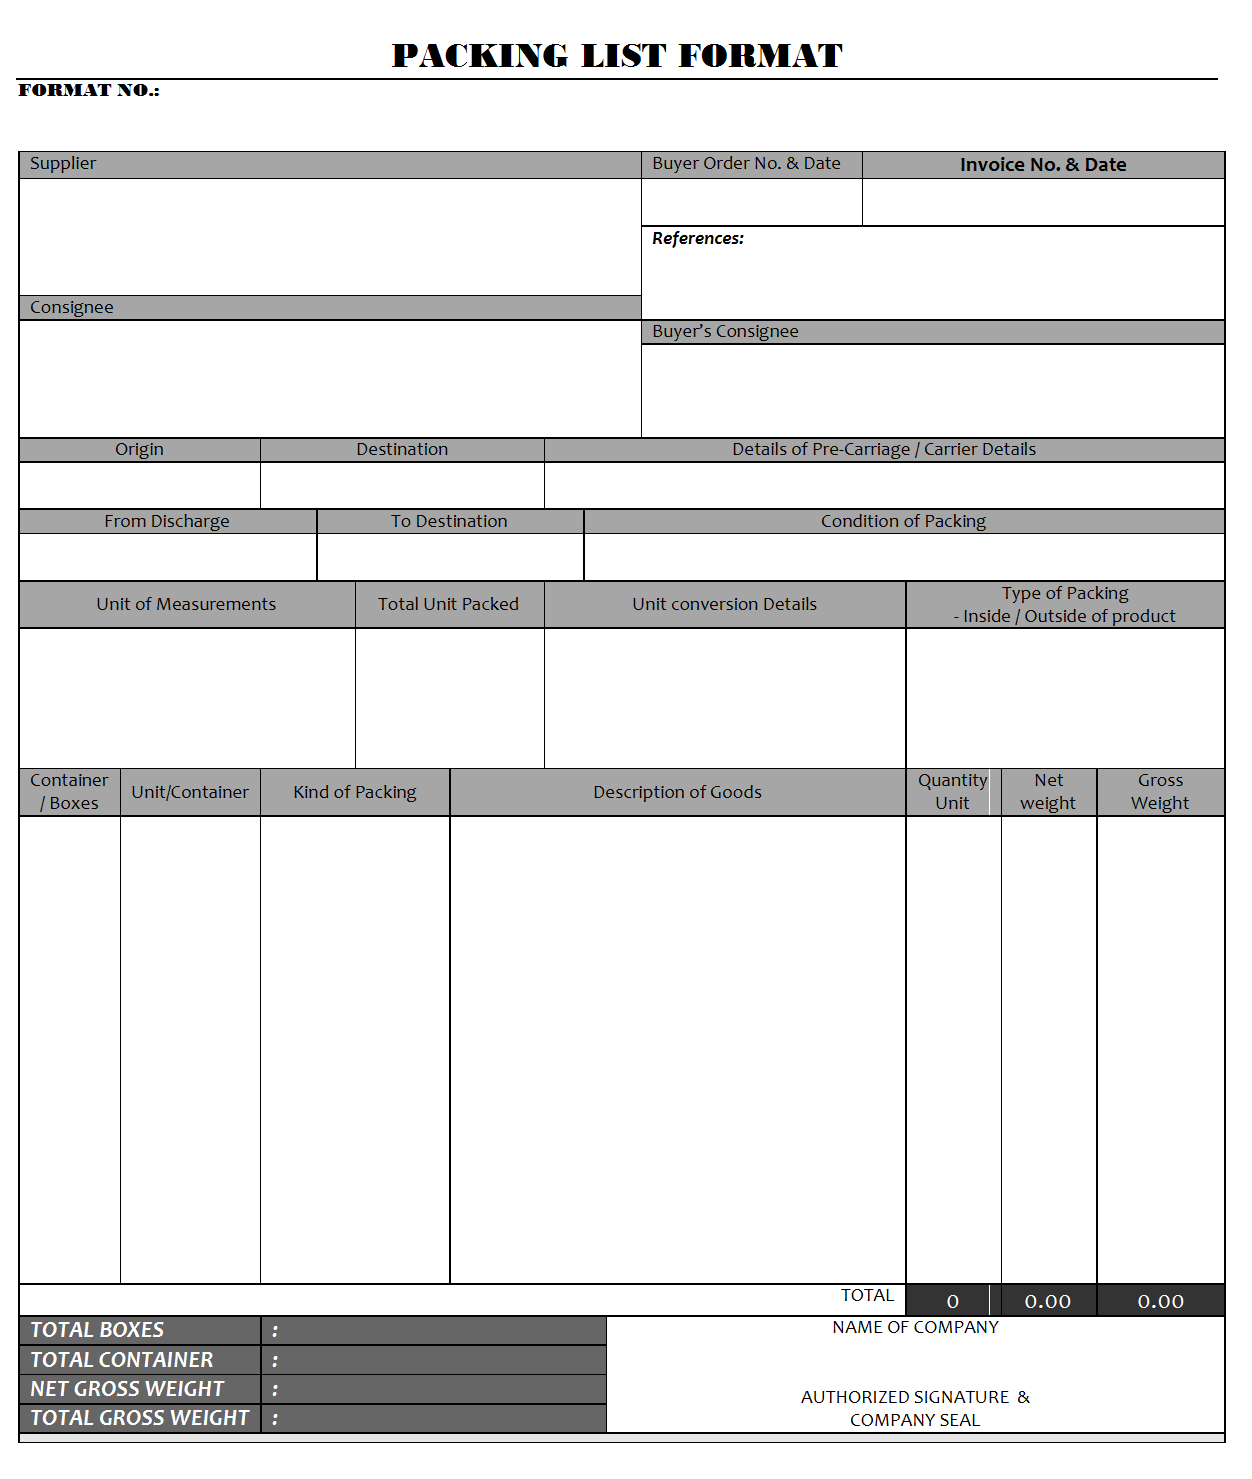 Packing list format - Regarding Commercial Invoice Packing List Template